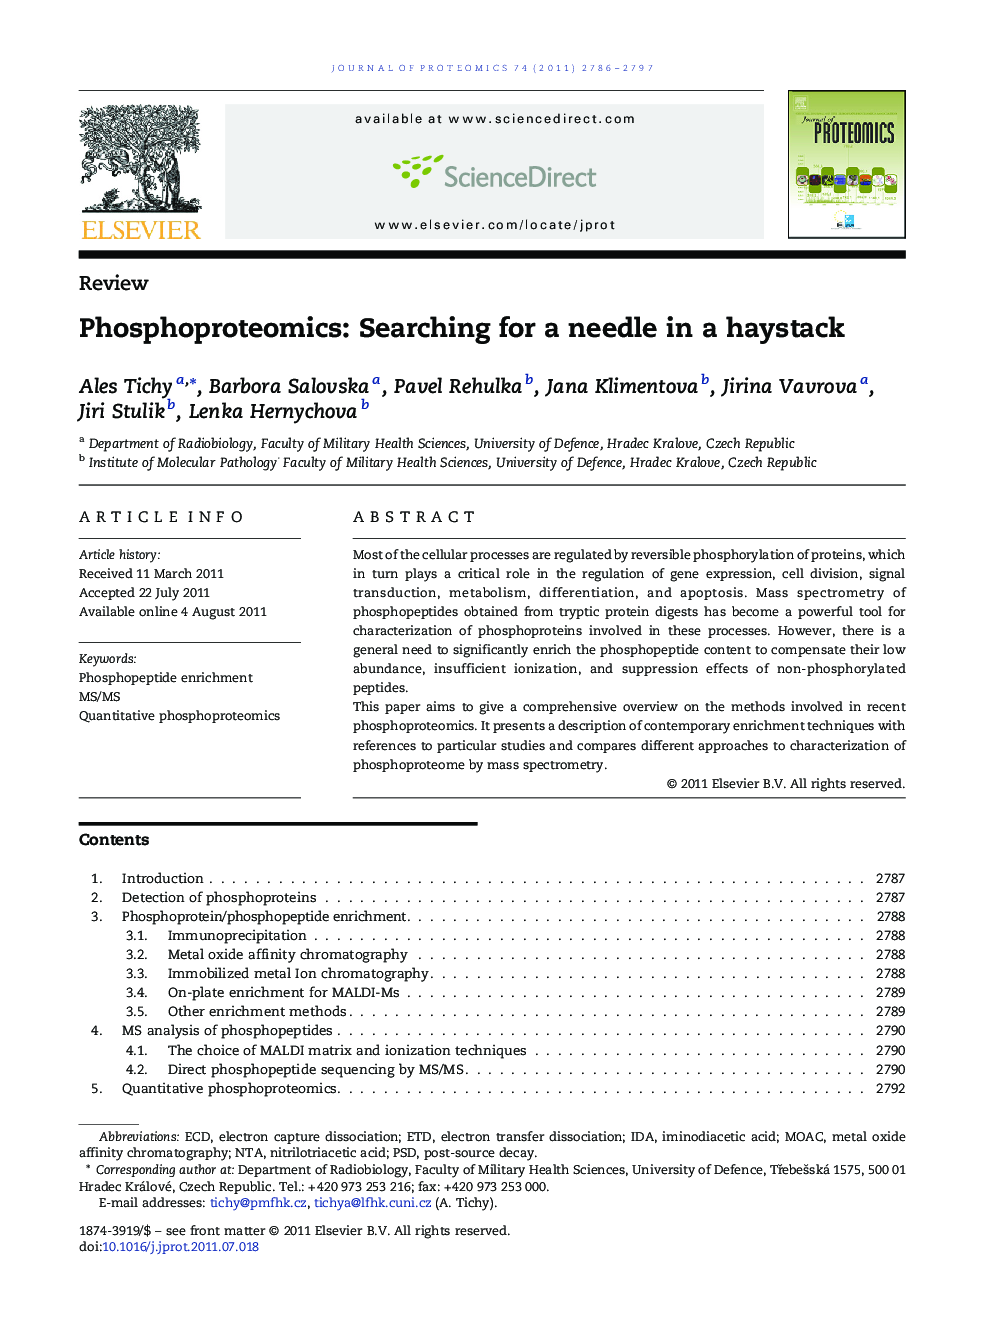 Phosphoproteomics: Searching for a needle in a haystack